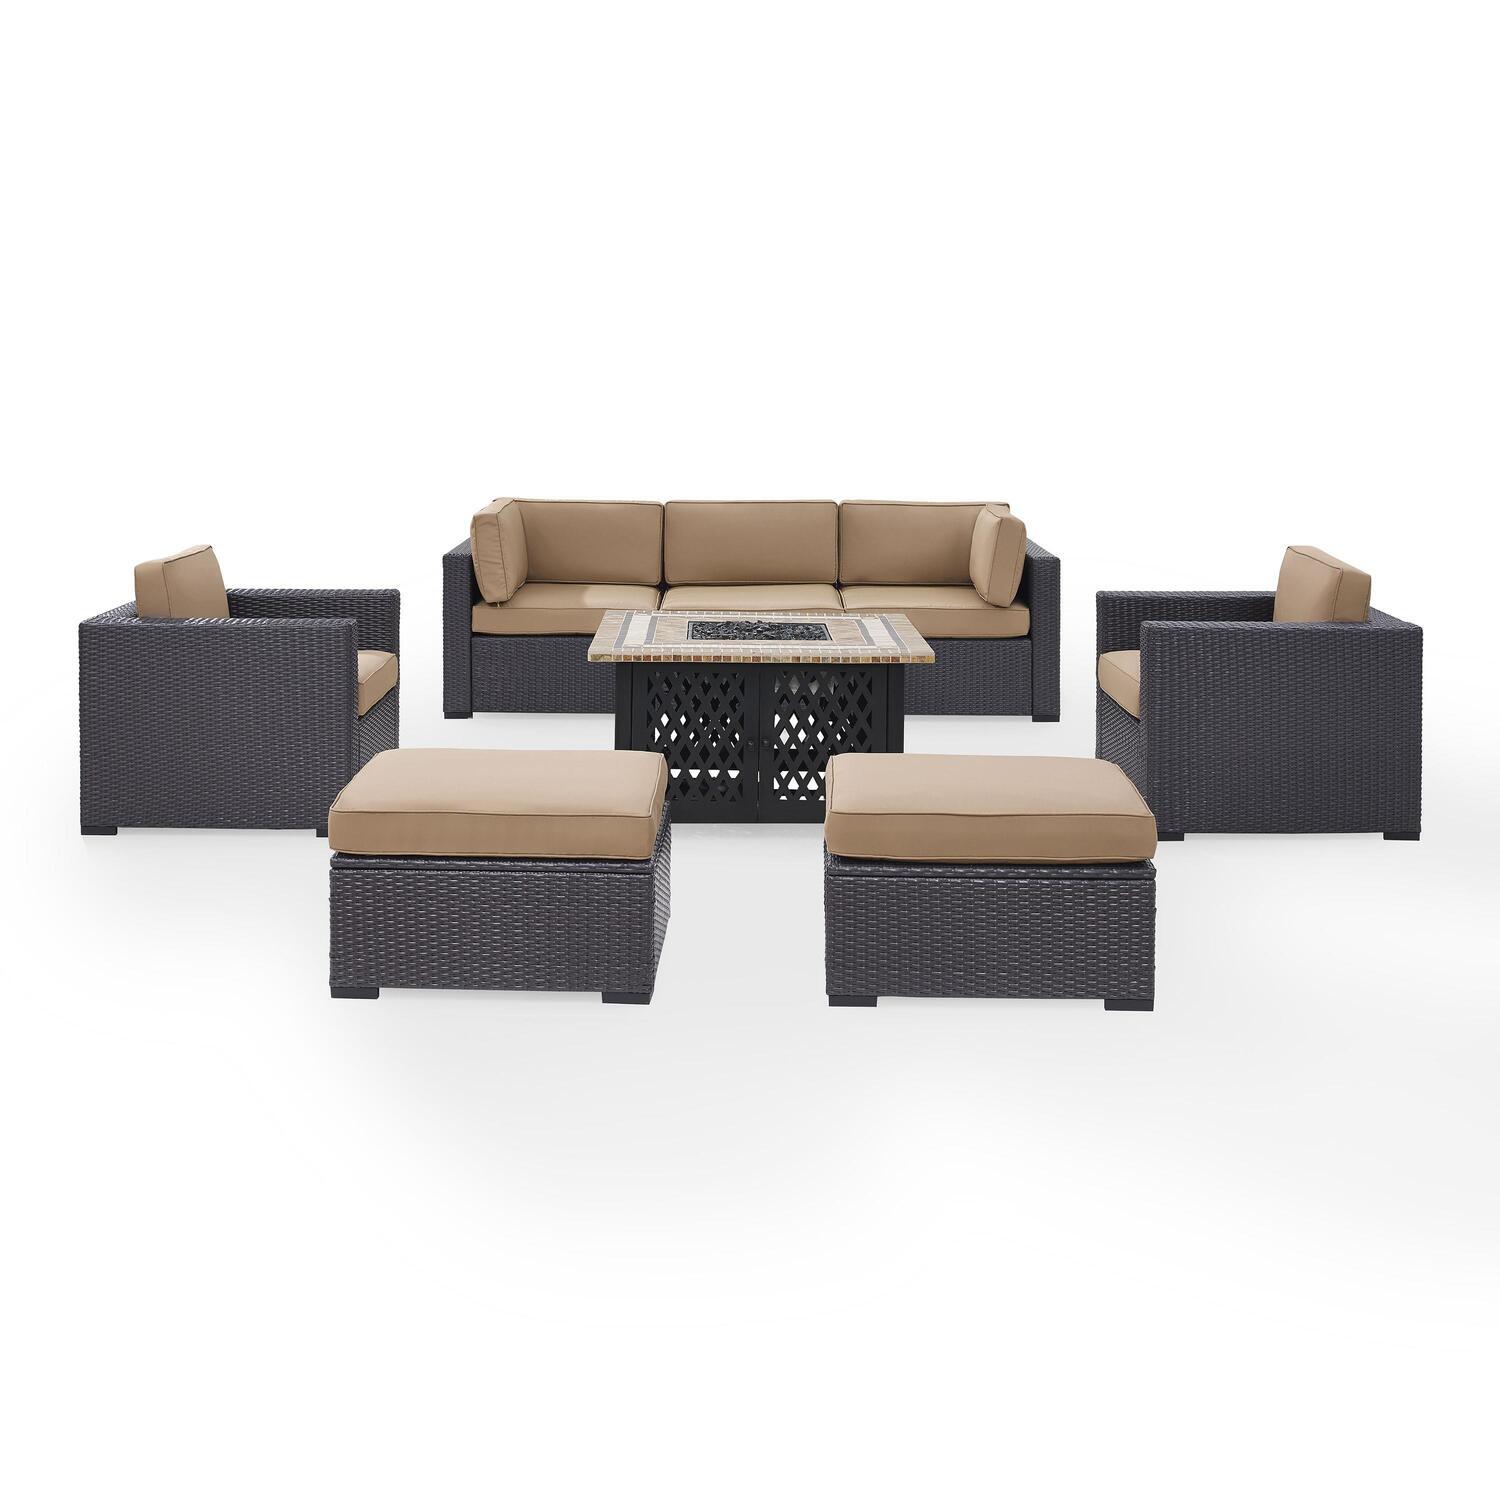 Crosley Furniture Biscayne 7 Piece Metal Patio Fire Pit Sofa Set in Brown/Mocha - image 1 of 4